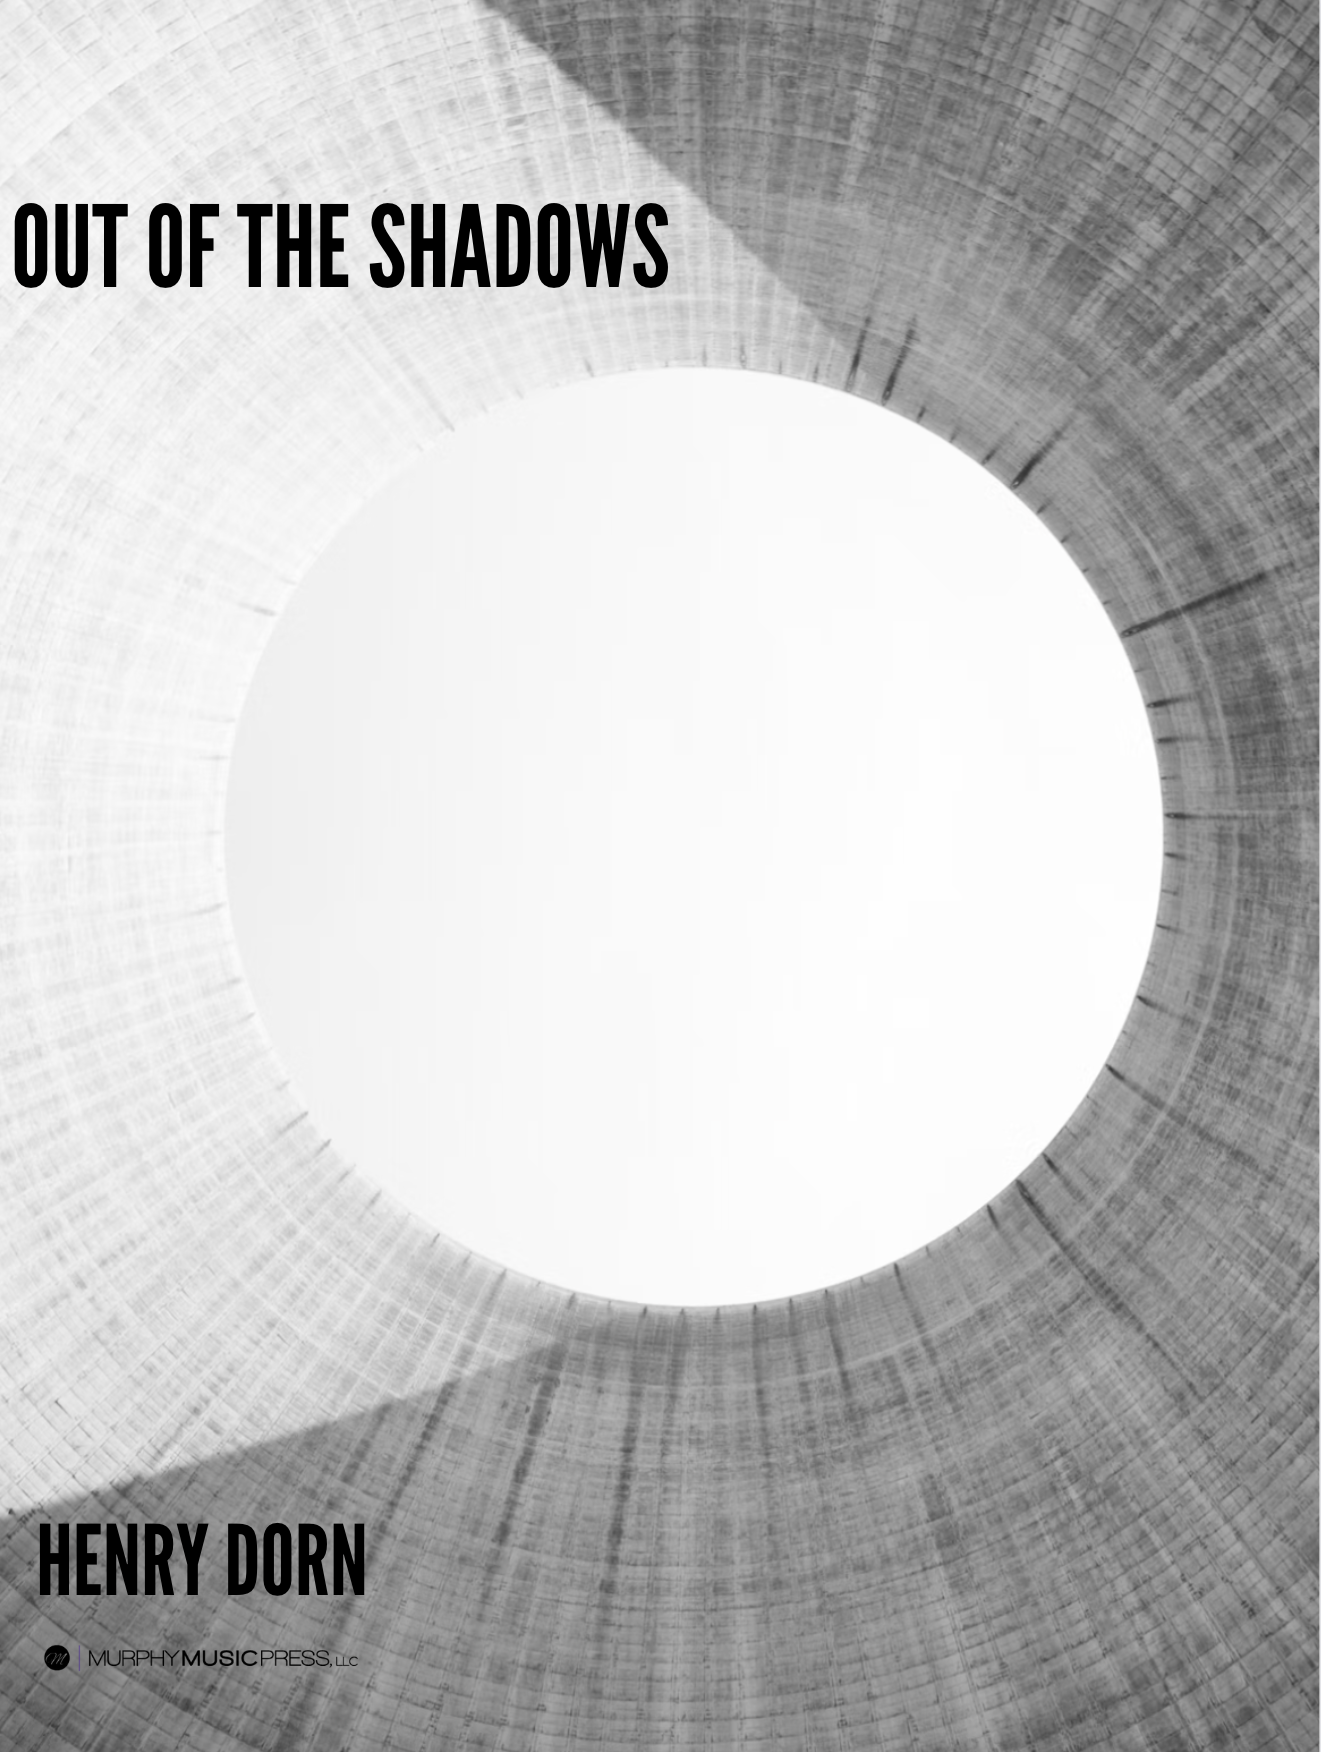 Out Of The Shadows by Henry Dorn